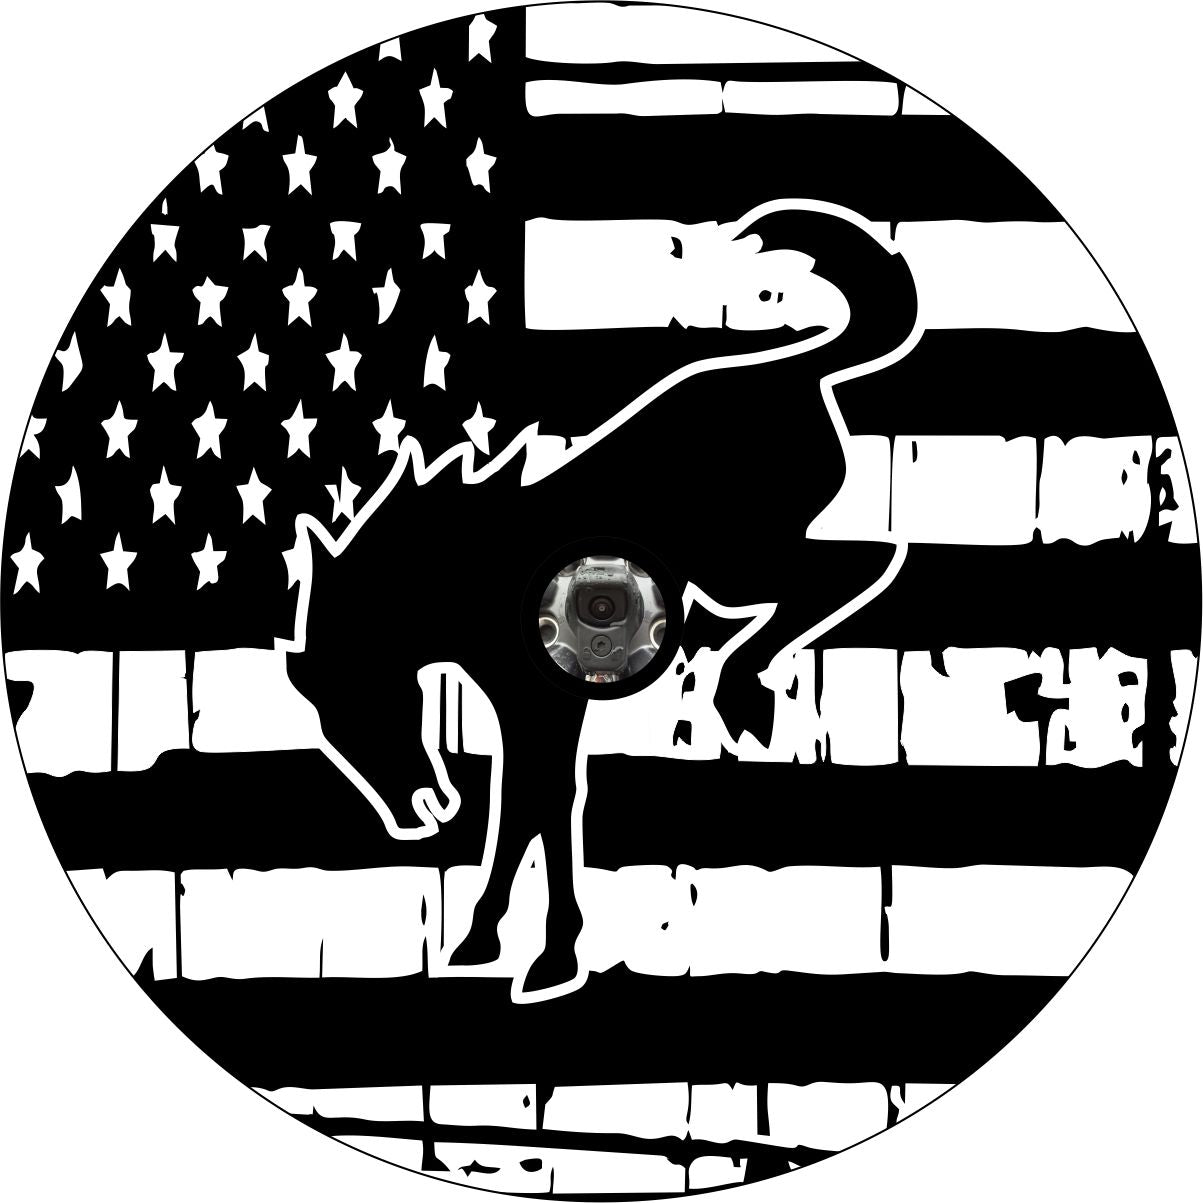 Bucking Bronco icon in front of a rustic painted American flag background spare tire cover design with a space for a back up camera.